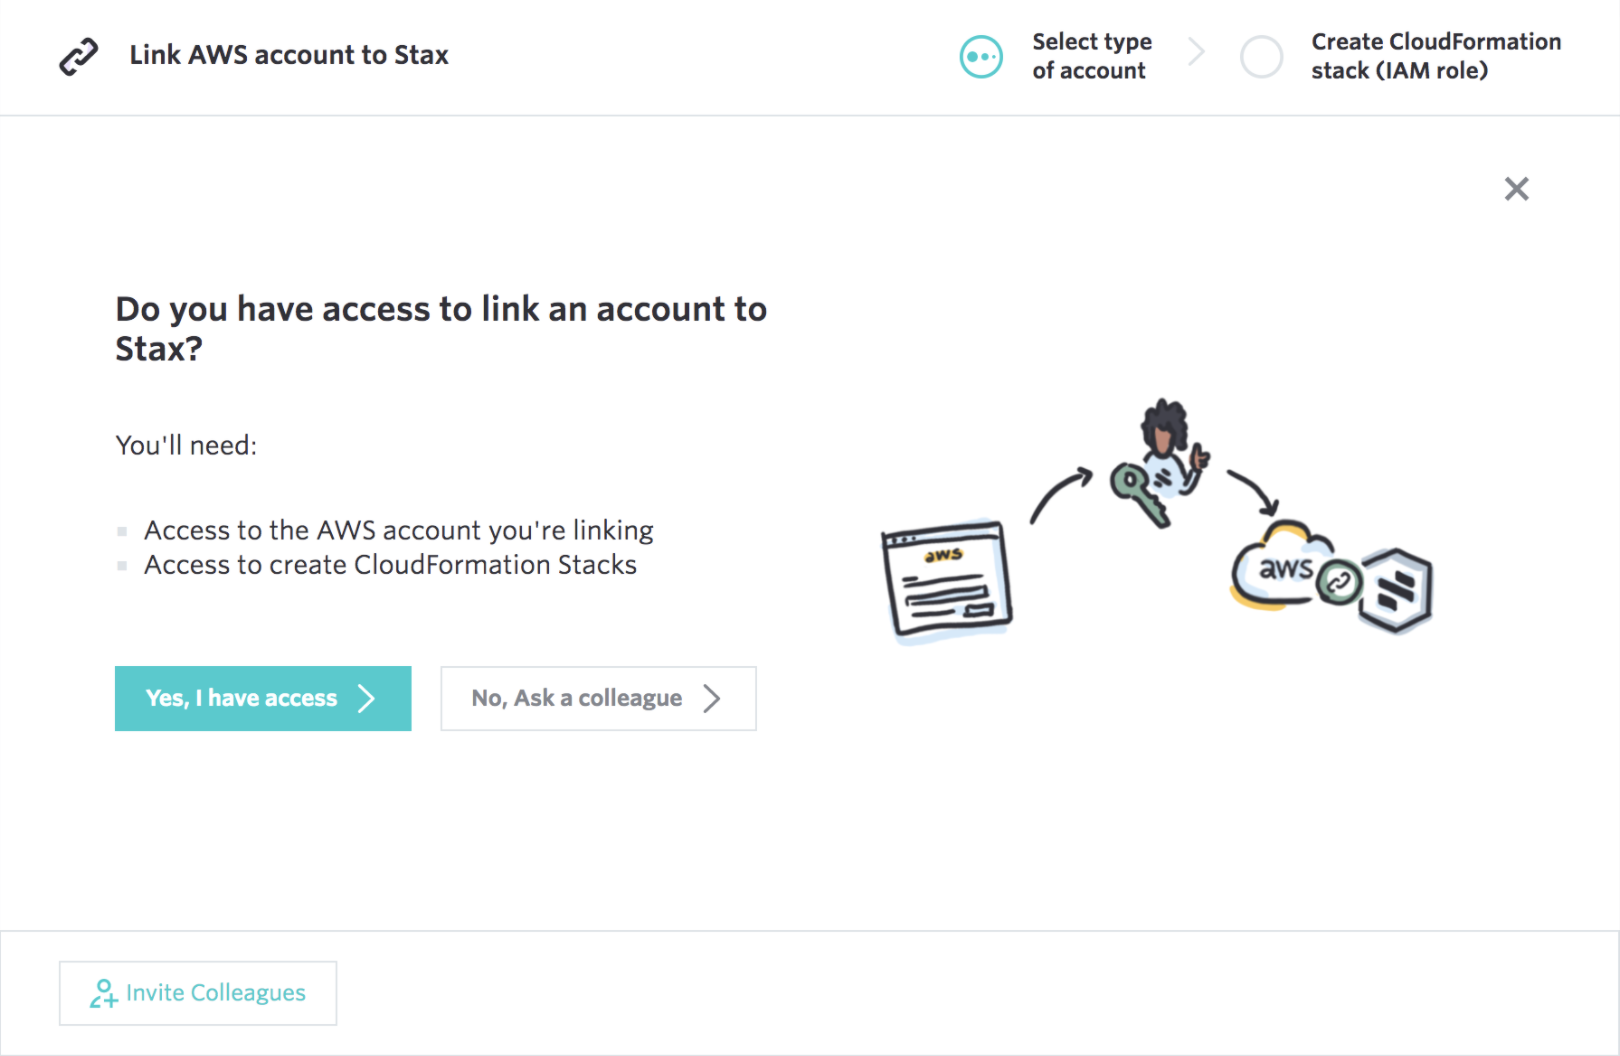 linking-your-aws-accounts-to-stax-cost-compliance-1.png